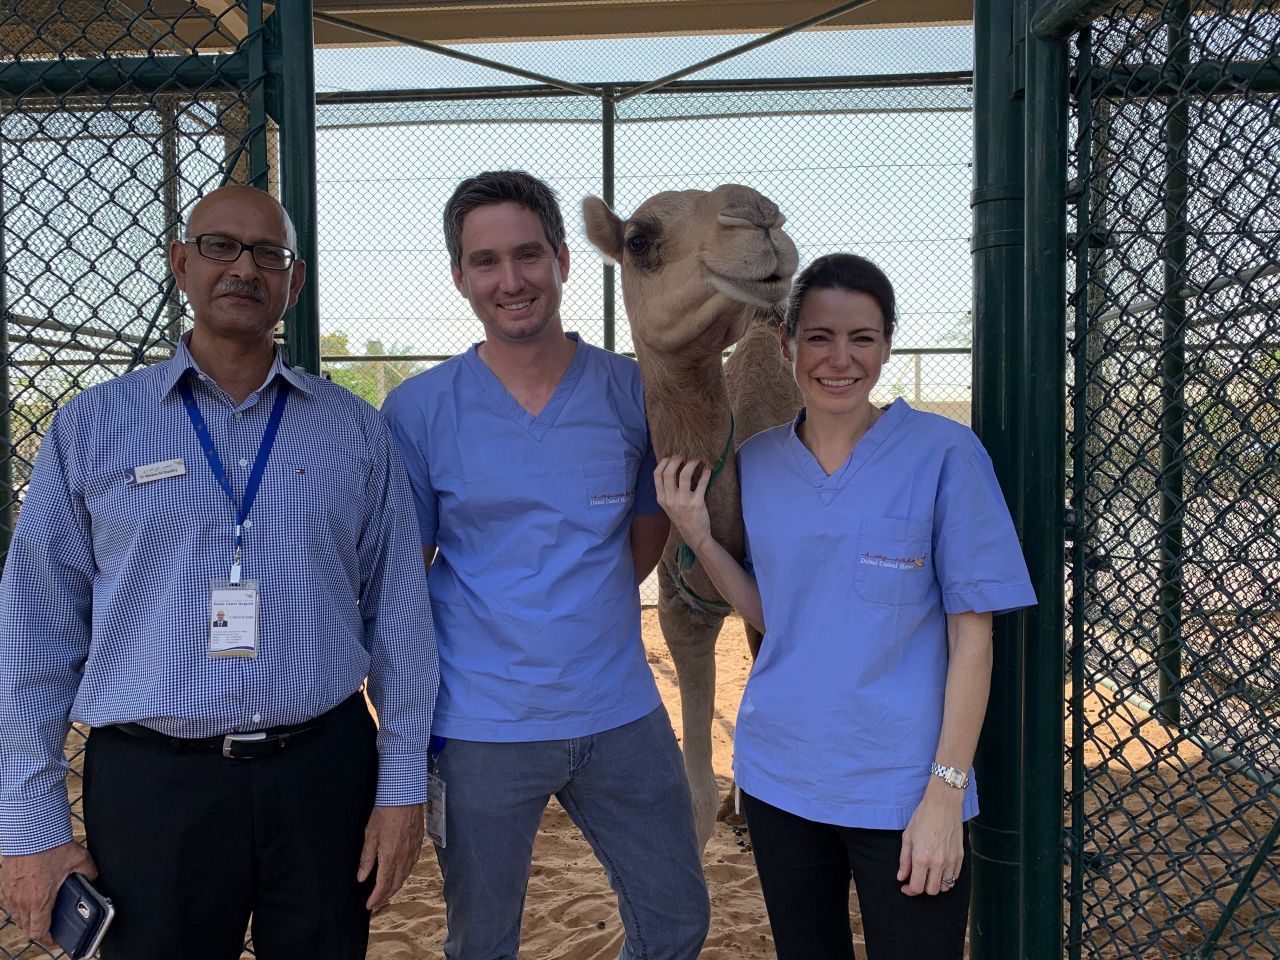 Dr Mansoor Ali Chaudhry, Dr Matthew De Bont, and Dr Claire Booth with a DCH patient. 